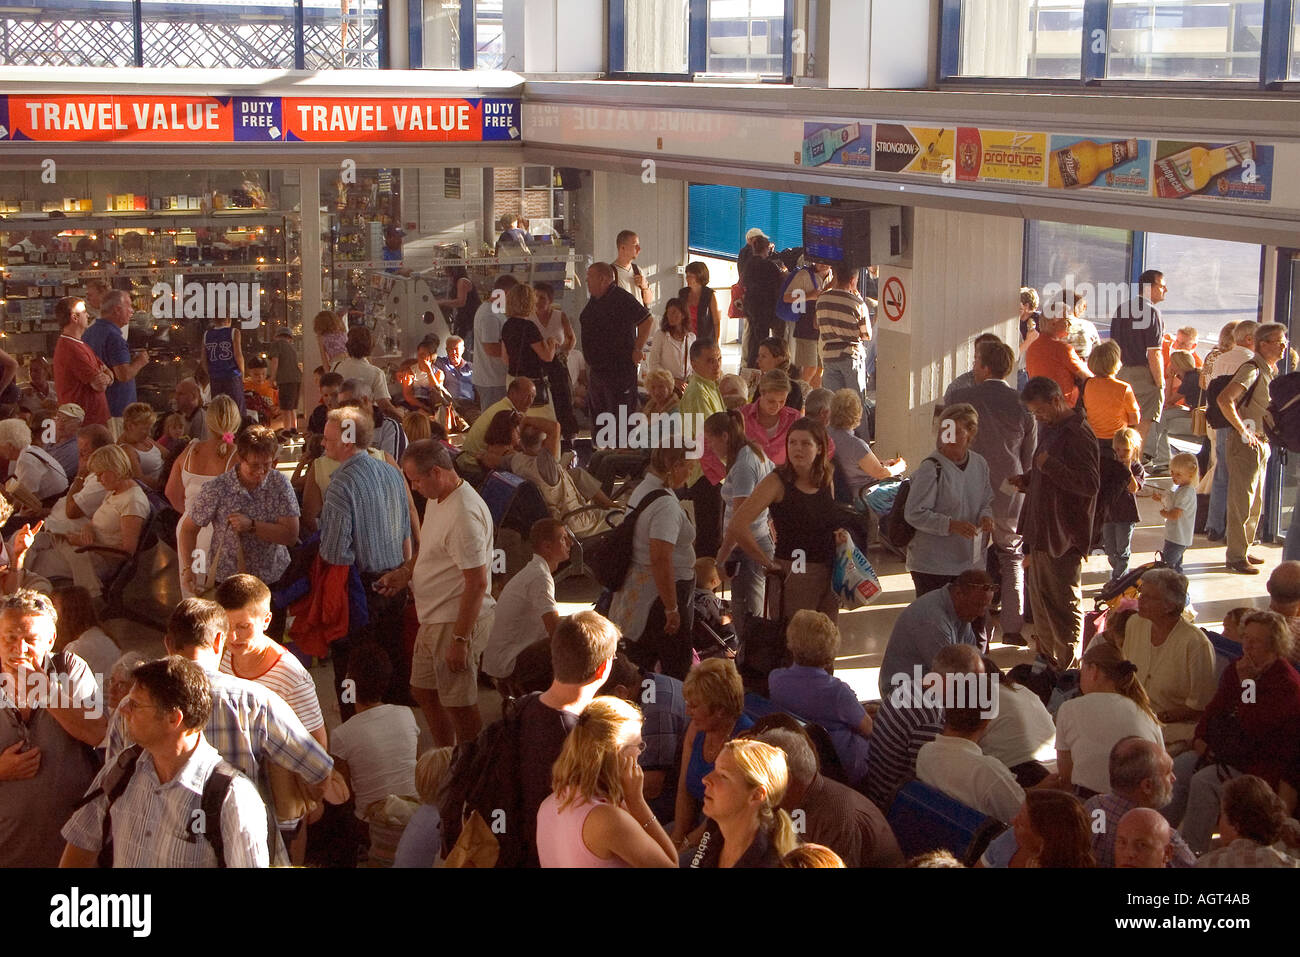 dh Departure lounge crowds KOS AIRPORT GREECE KOS Air traffic controller strike delays Tourist crowd people in waiting area crowded Stock Photo